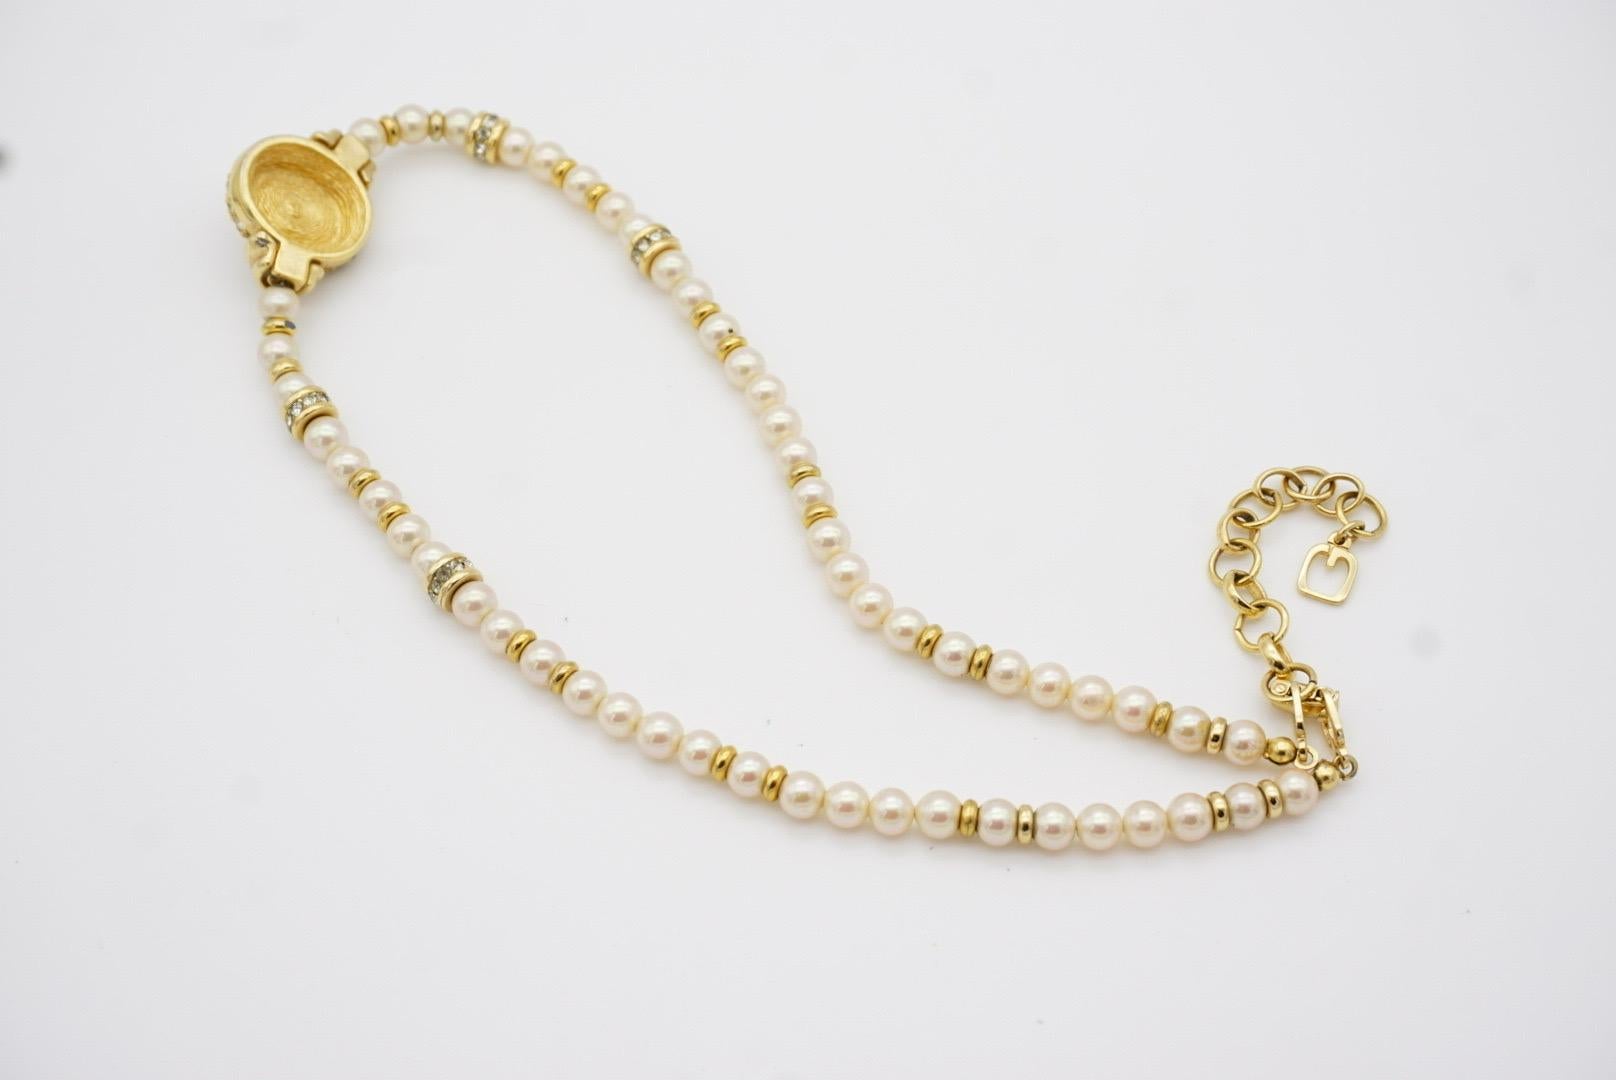 Christian Dior GROSSE 1960s White Oval Crystals Pendant Beaded Pearls Necklace For Sale 11